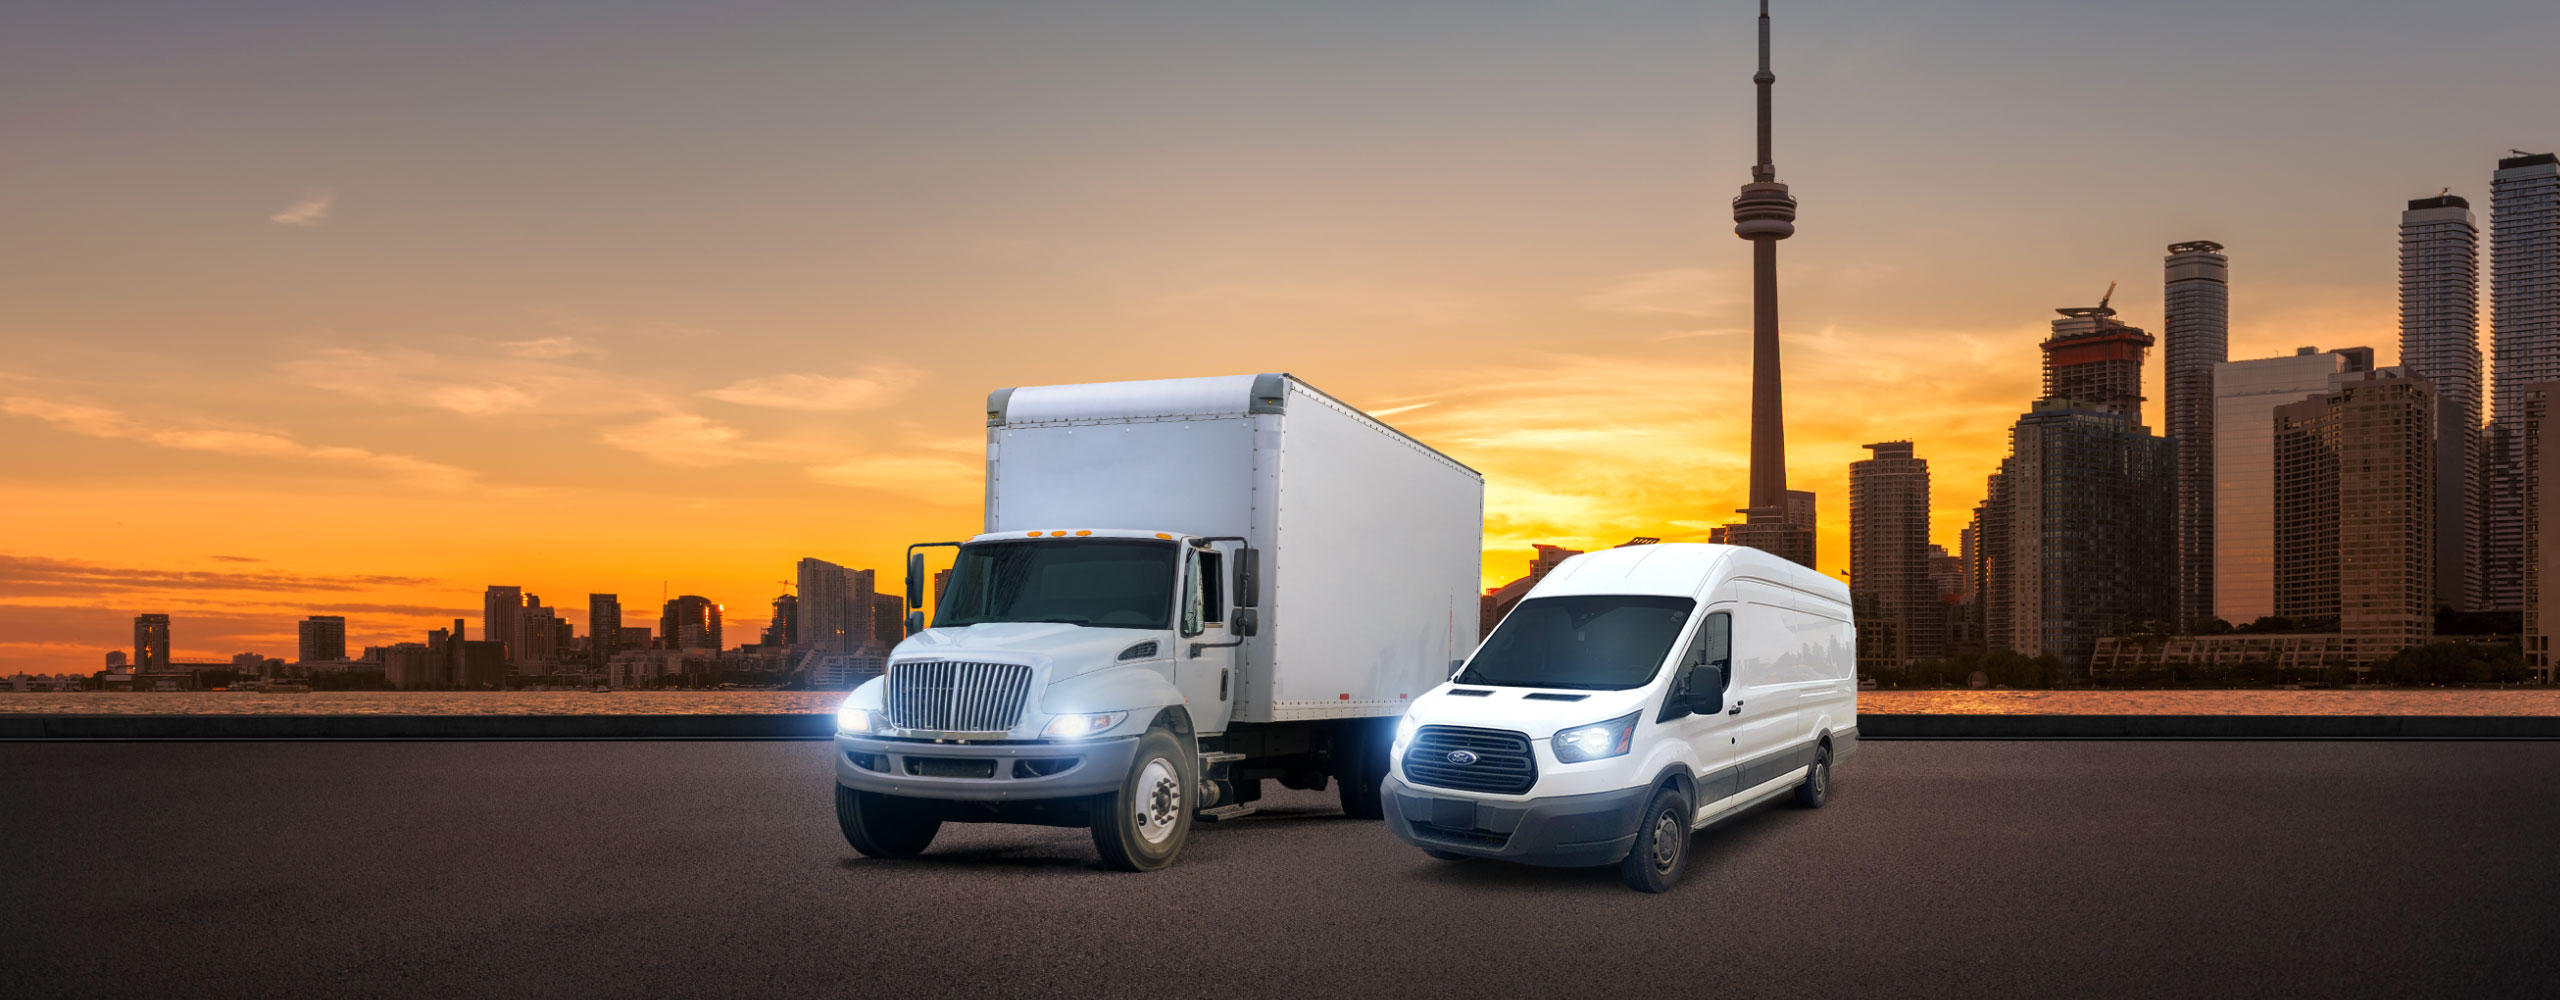 White city truck and courier van carrying expedited shipments parked in front of Toronto, ON cityscape